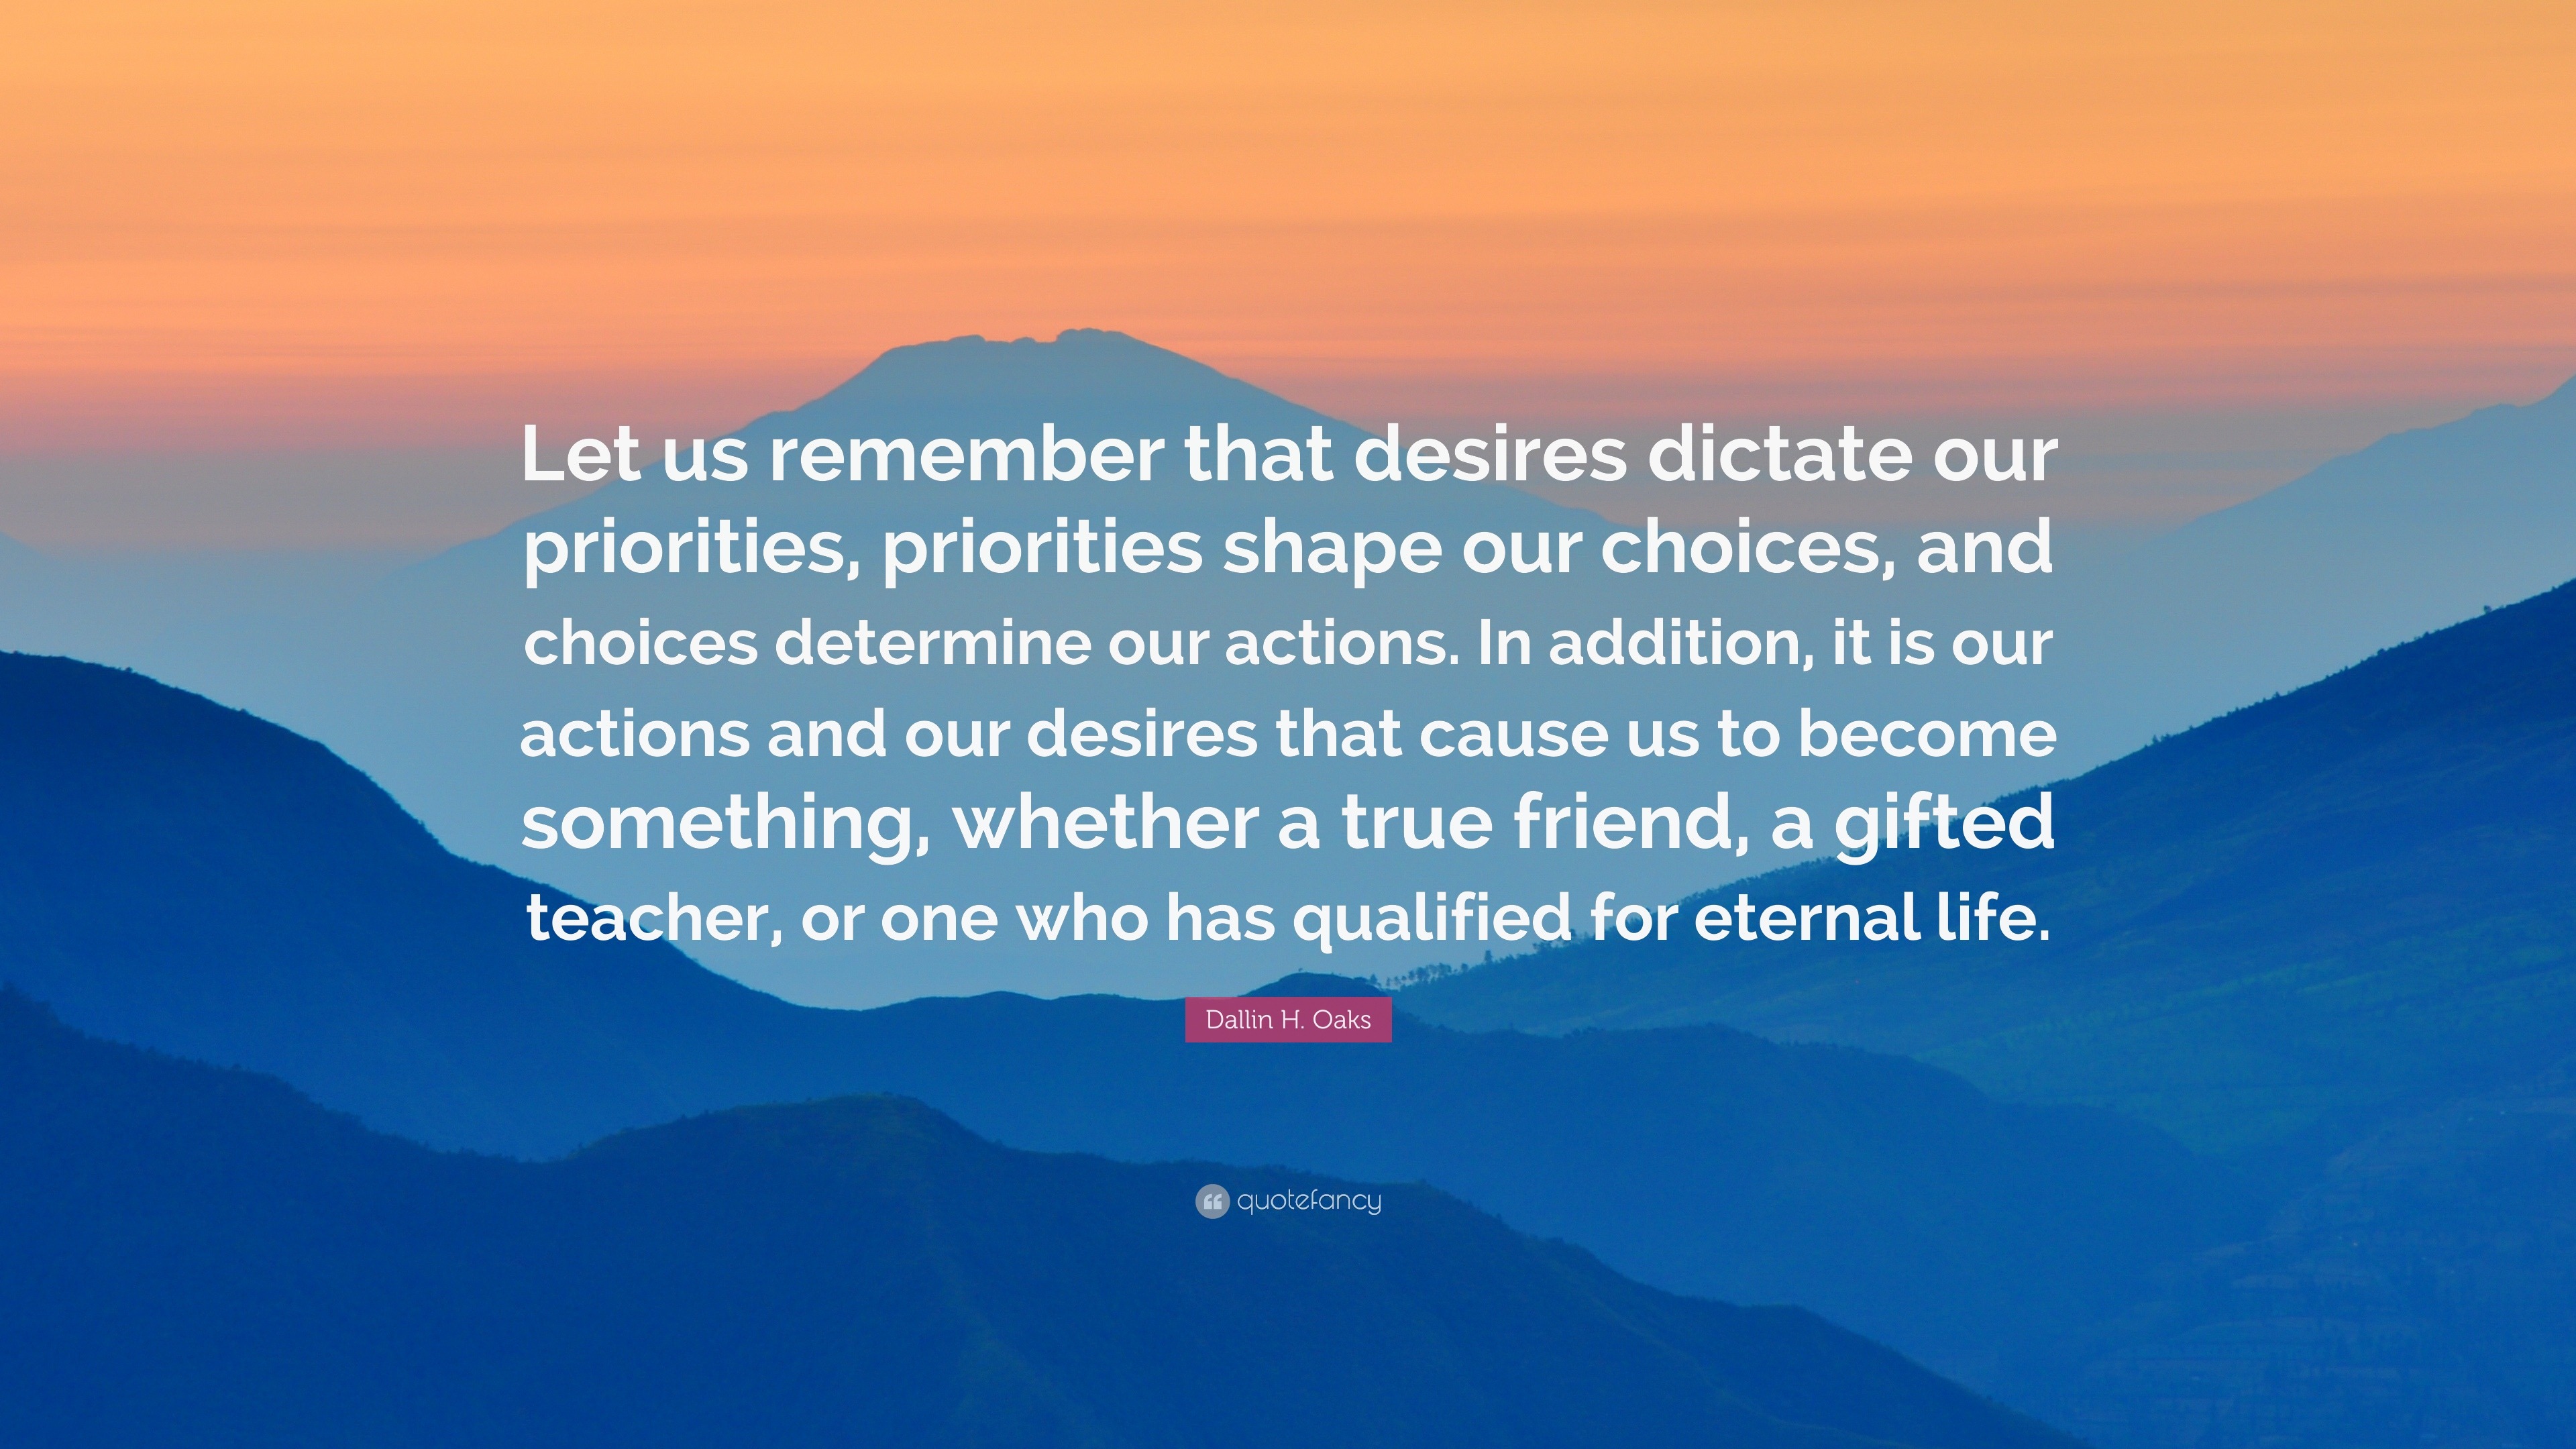 Dallin H. Oaks Quote “Let us remember that desires dictate our